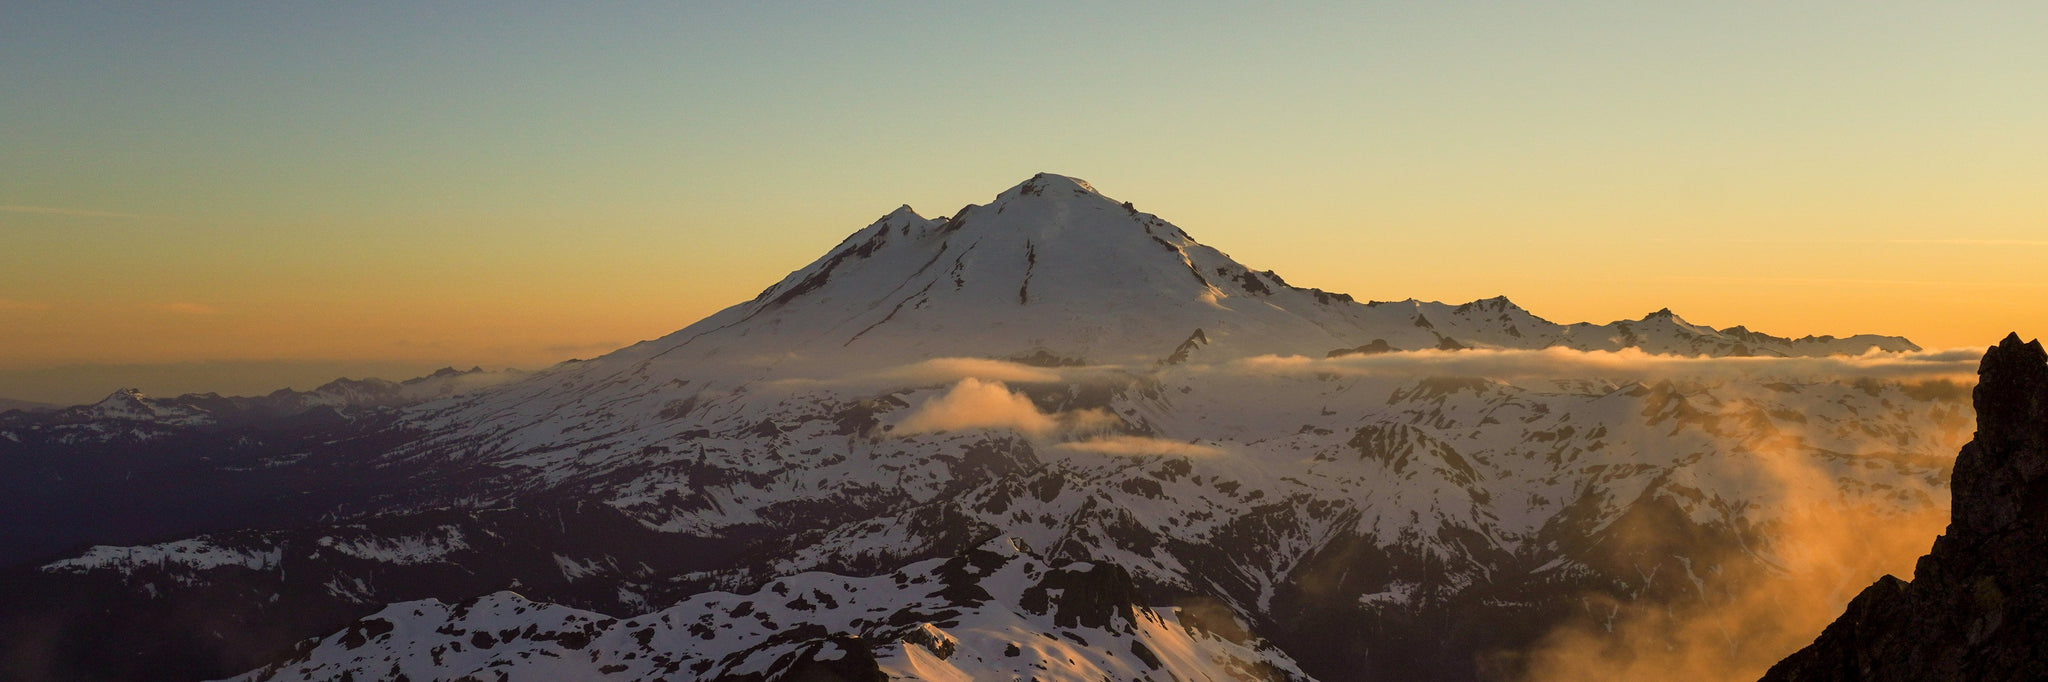 Sunset on Mount Baker from the Winnie's Slide bivy of Mount Shuksan's Fisher Chimneys route